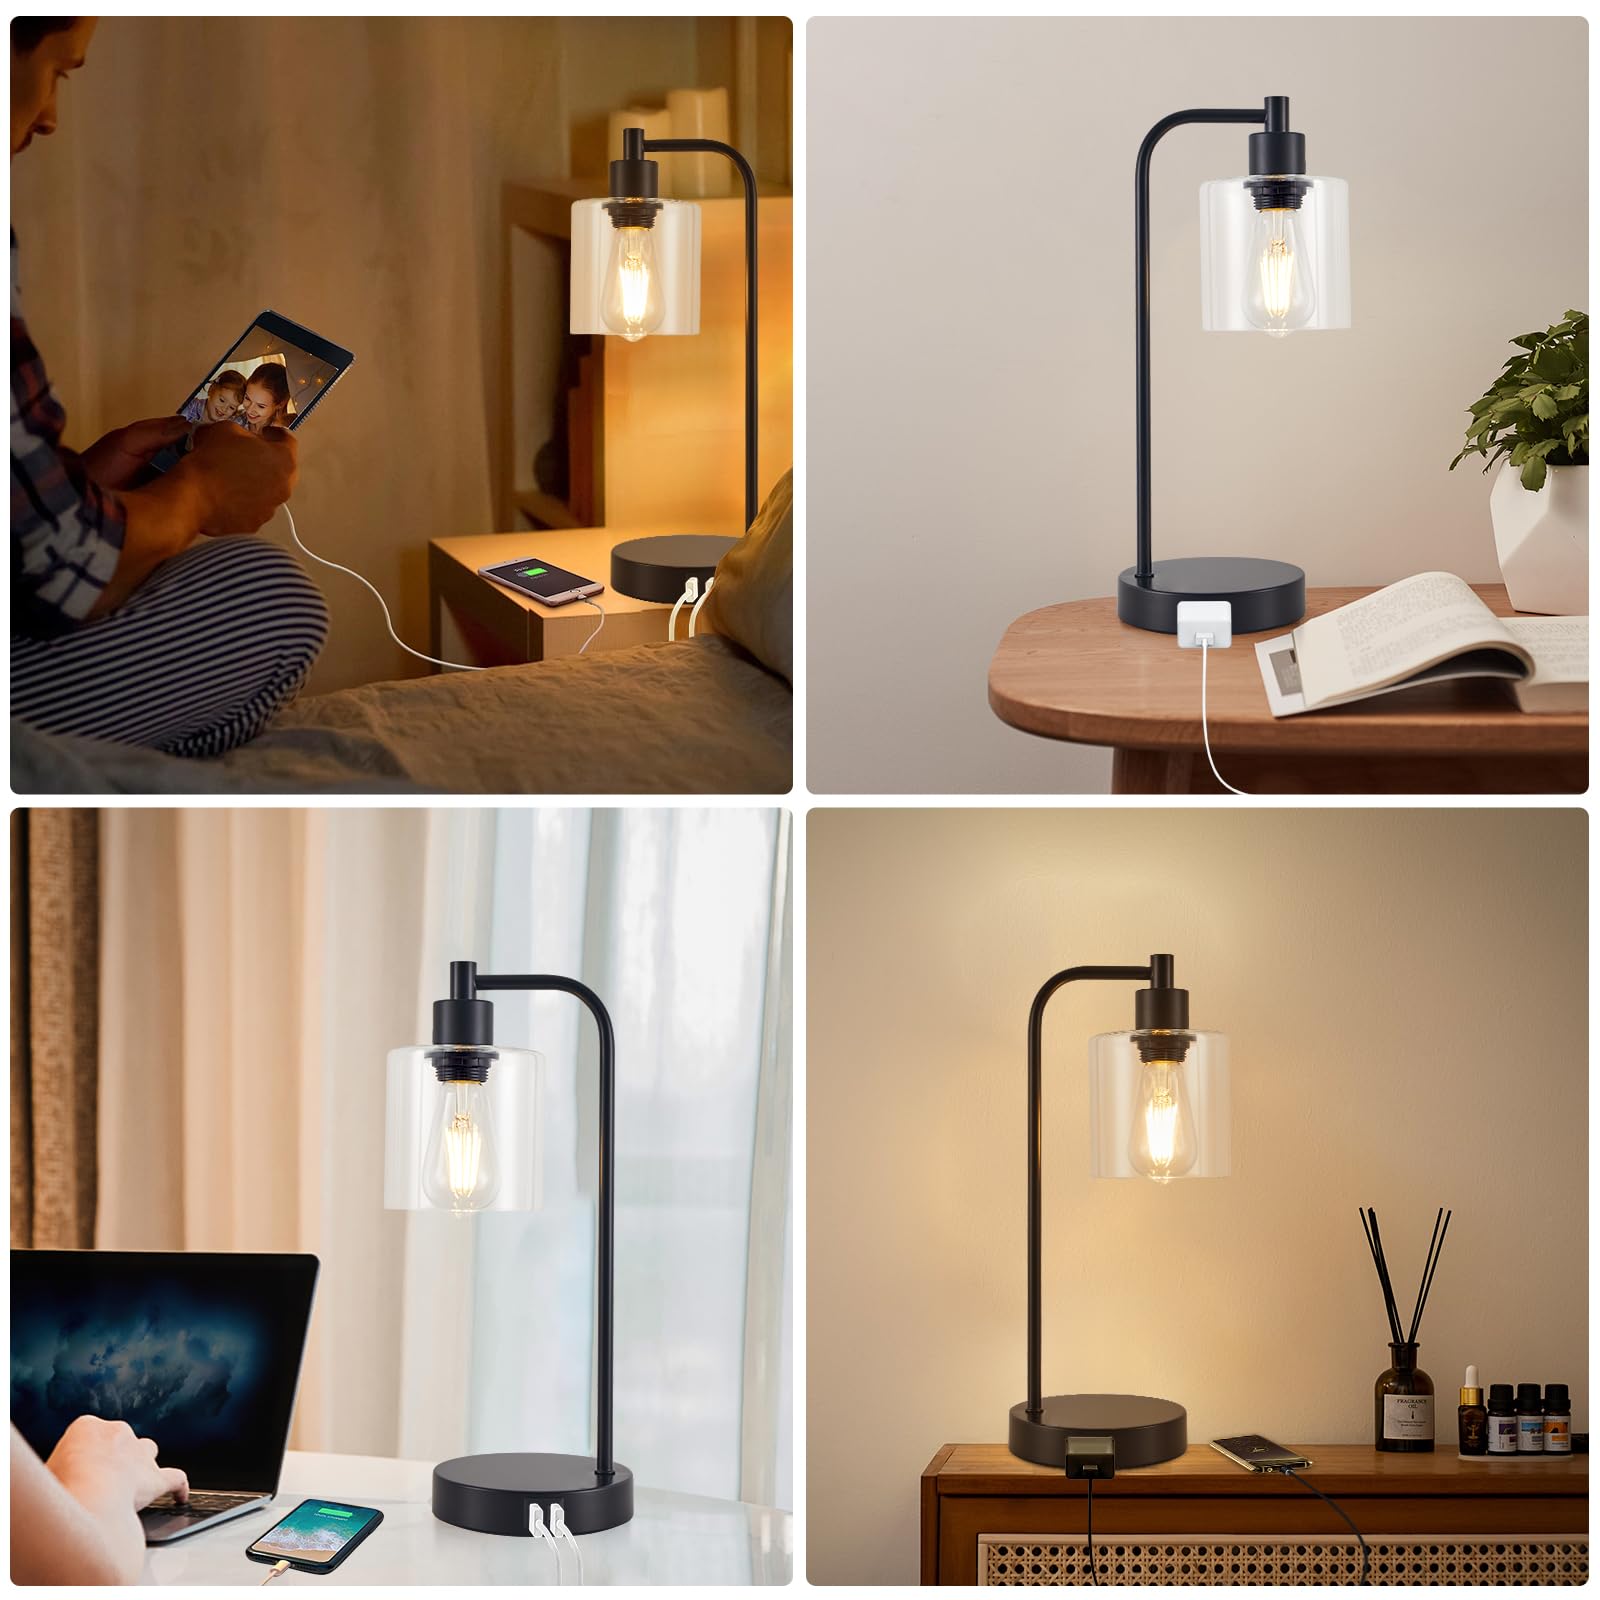 Table Lamp for Bedroom, Bedside Lamp with 3 Dimming Settings, Small Lamp with 2 USB Ports and 1 AC Outlet, Modern Nightstand Lamp with Glass Shade, Touch Lamp for Bedroom Nightstand, LED Bulb Included